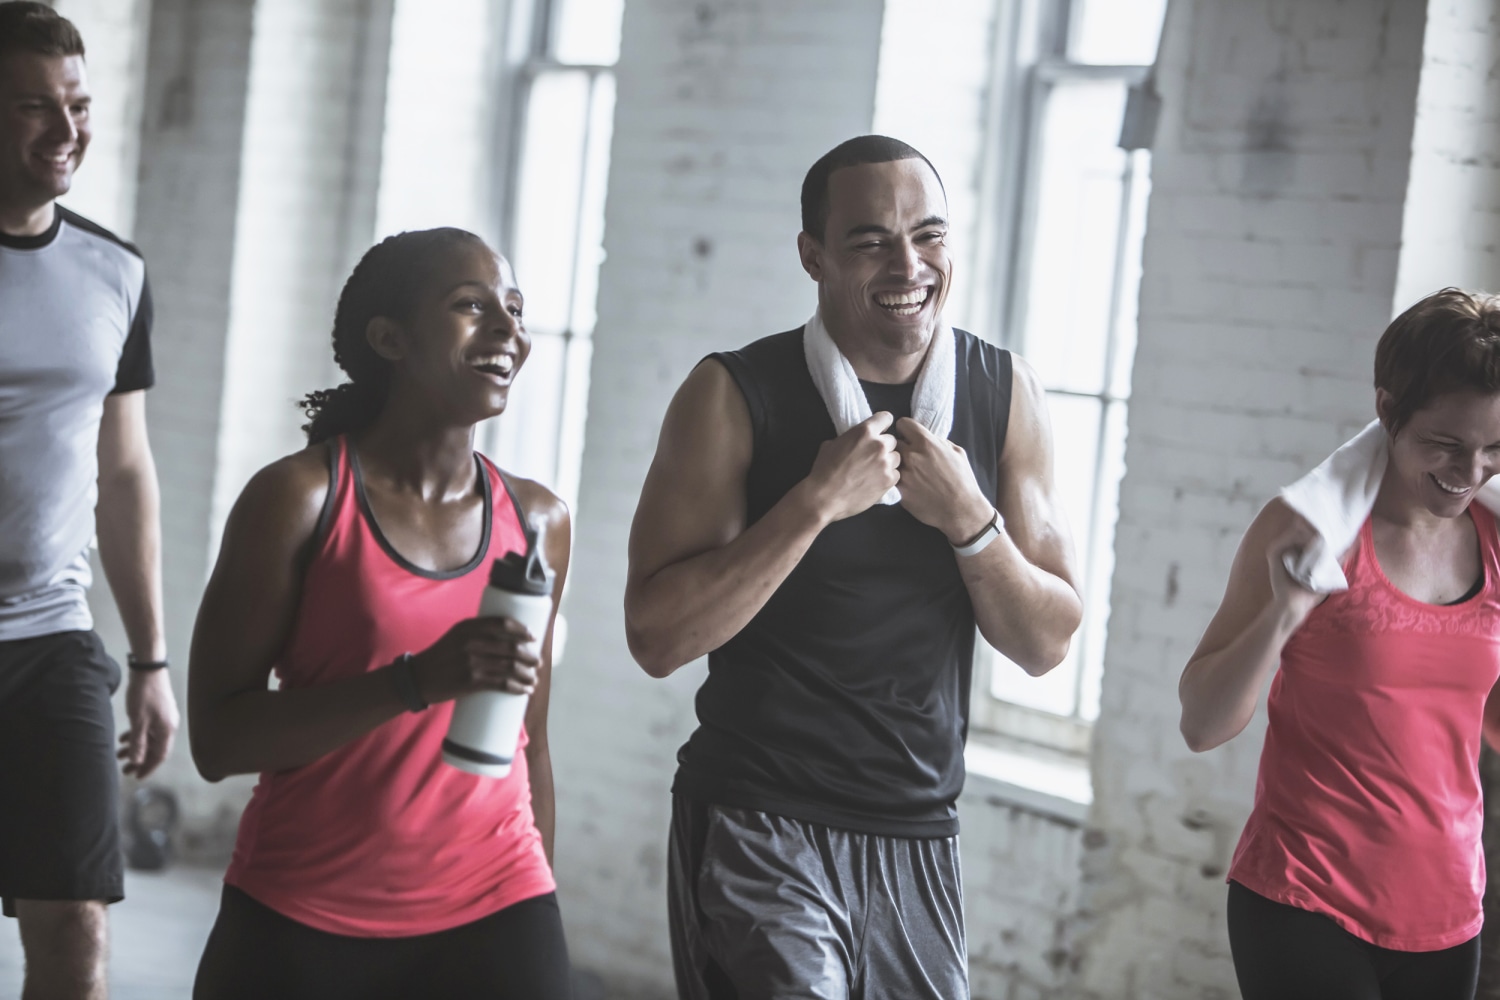 A post-exercise checklist to help you find a workout you actually like